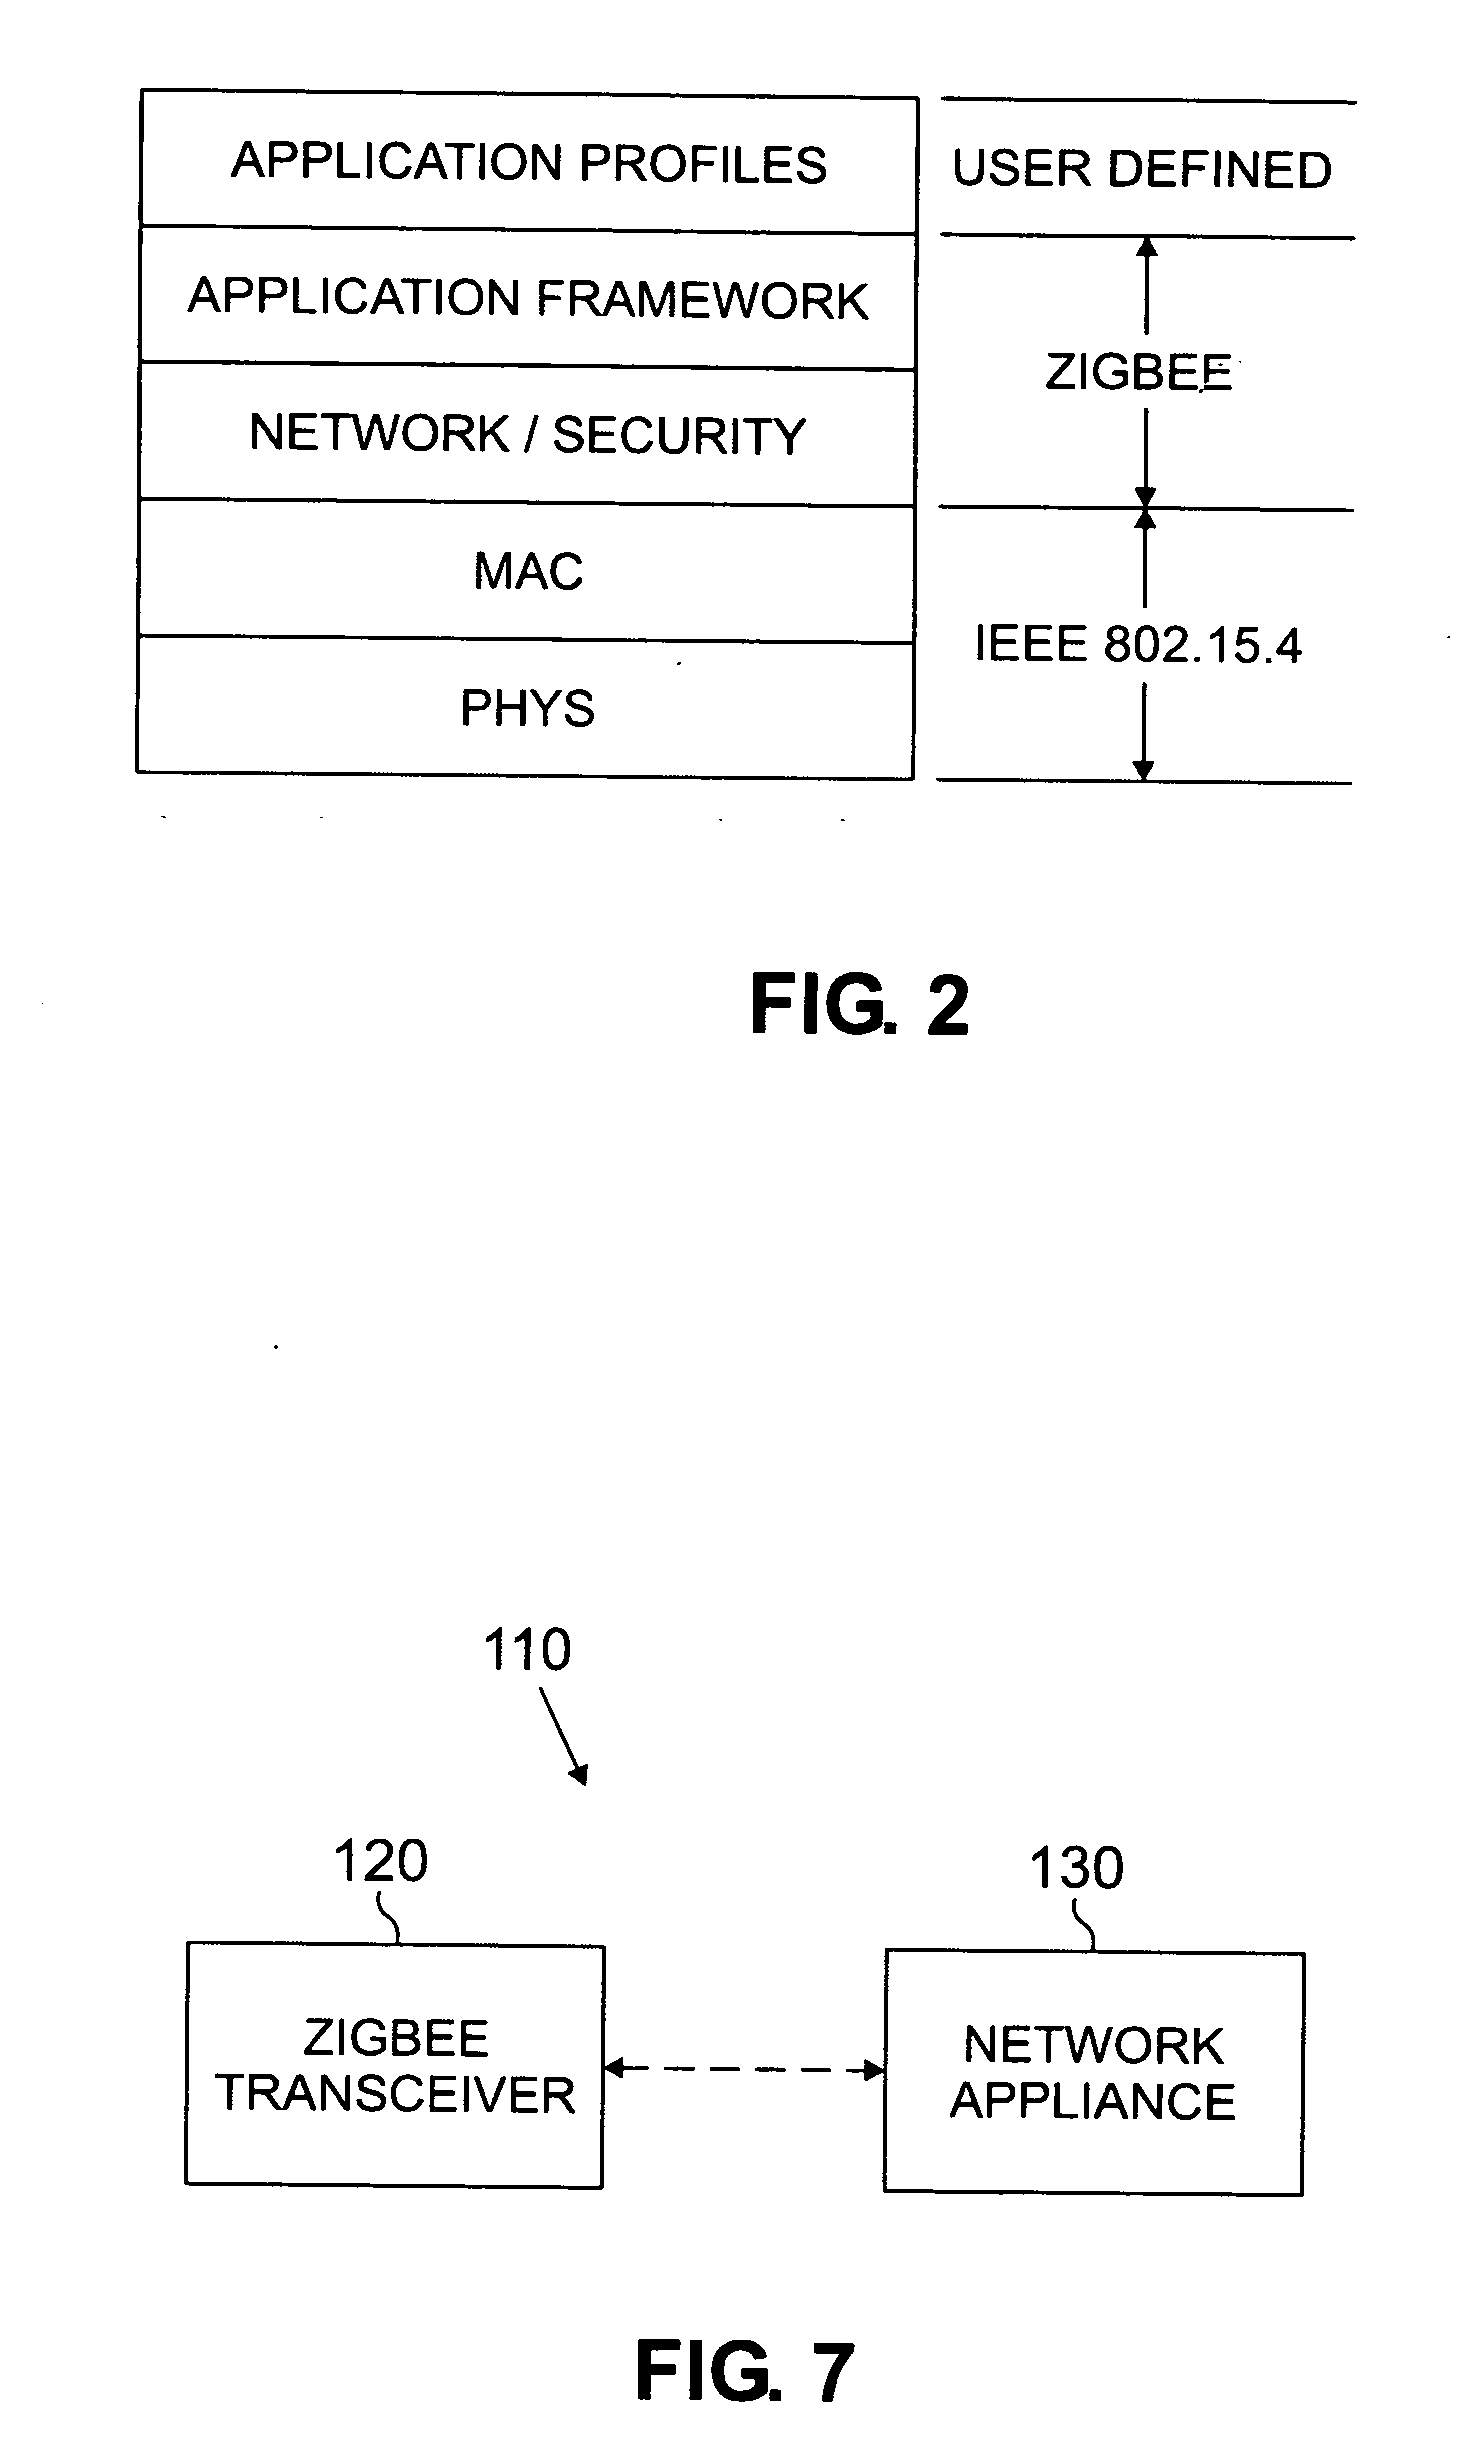 Network alarm clock communicating alarm settings over a wireless or other local area network